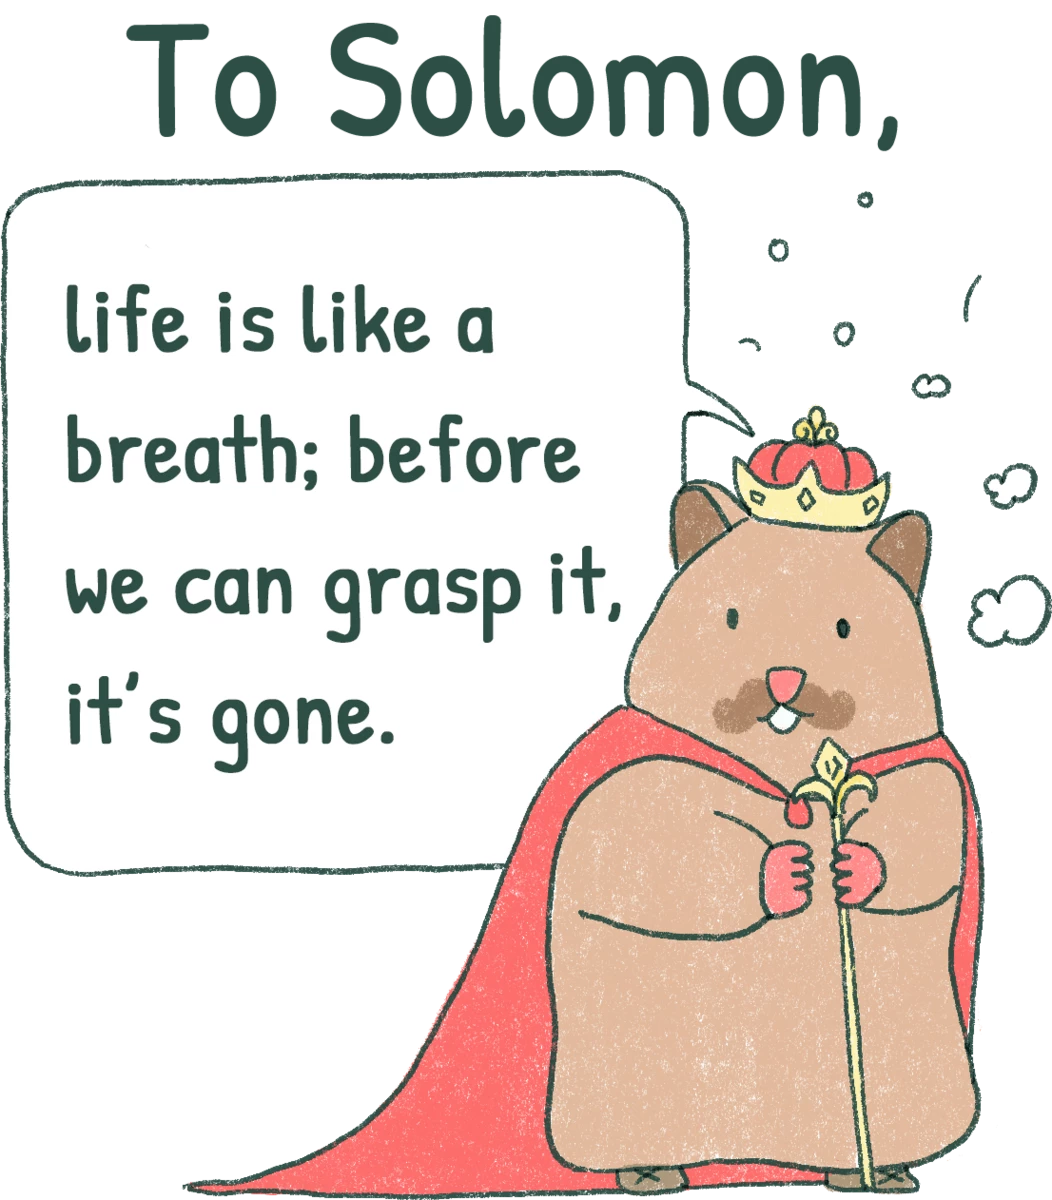 To Solomon, life is like a breath; before we can grasp it, it's gone.